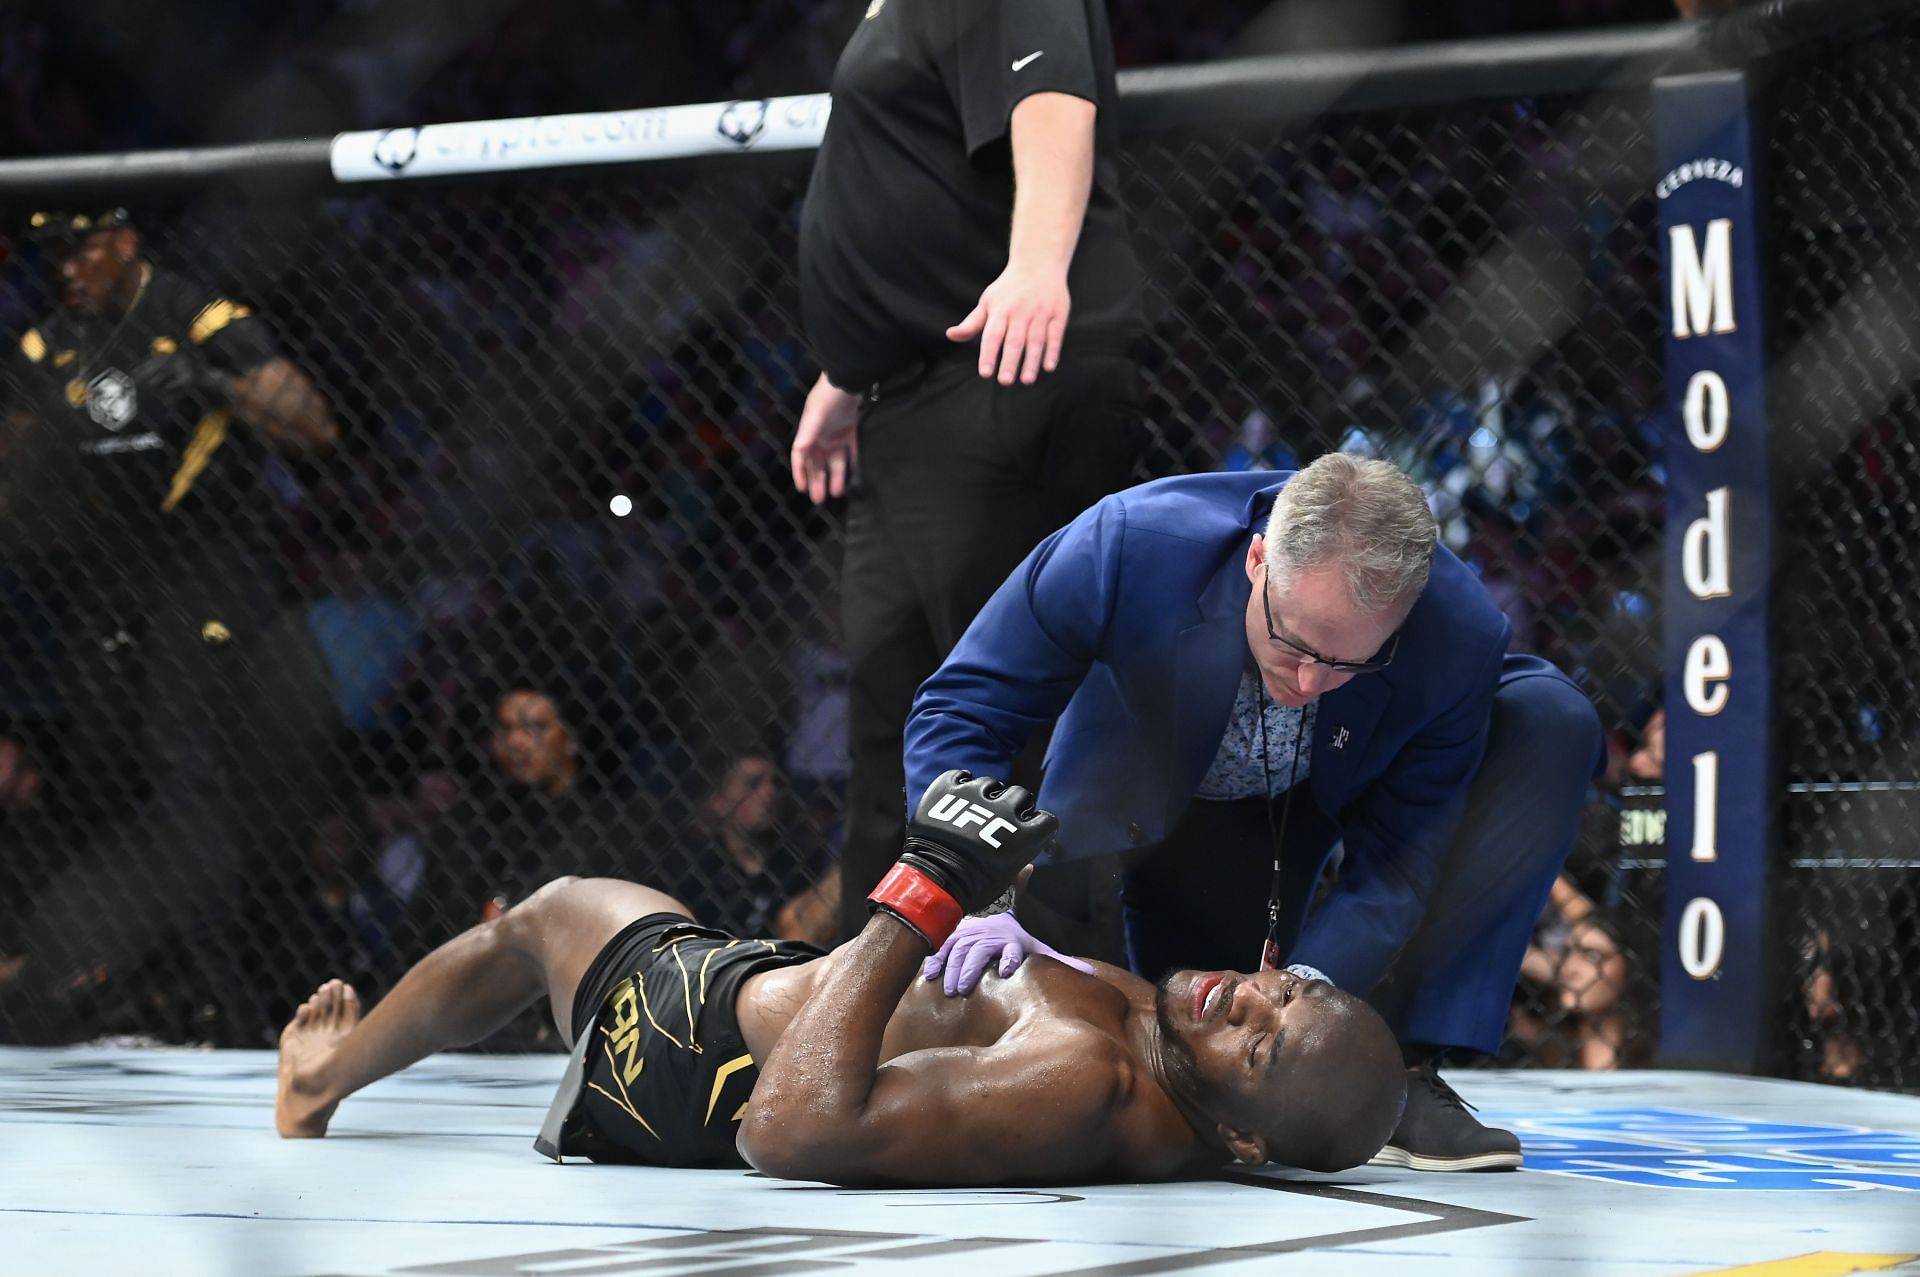 Kamaru Usman was left unconscious by Leon Edwards in a stunning knockout